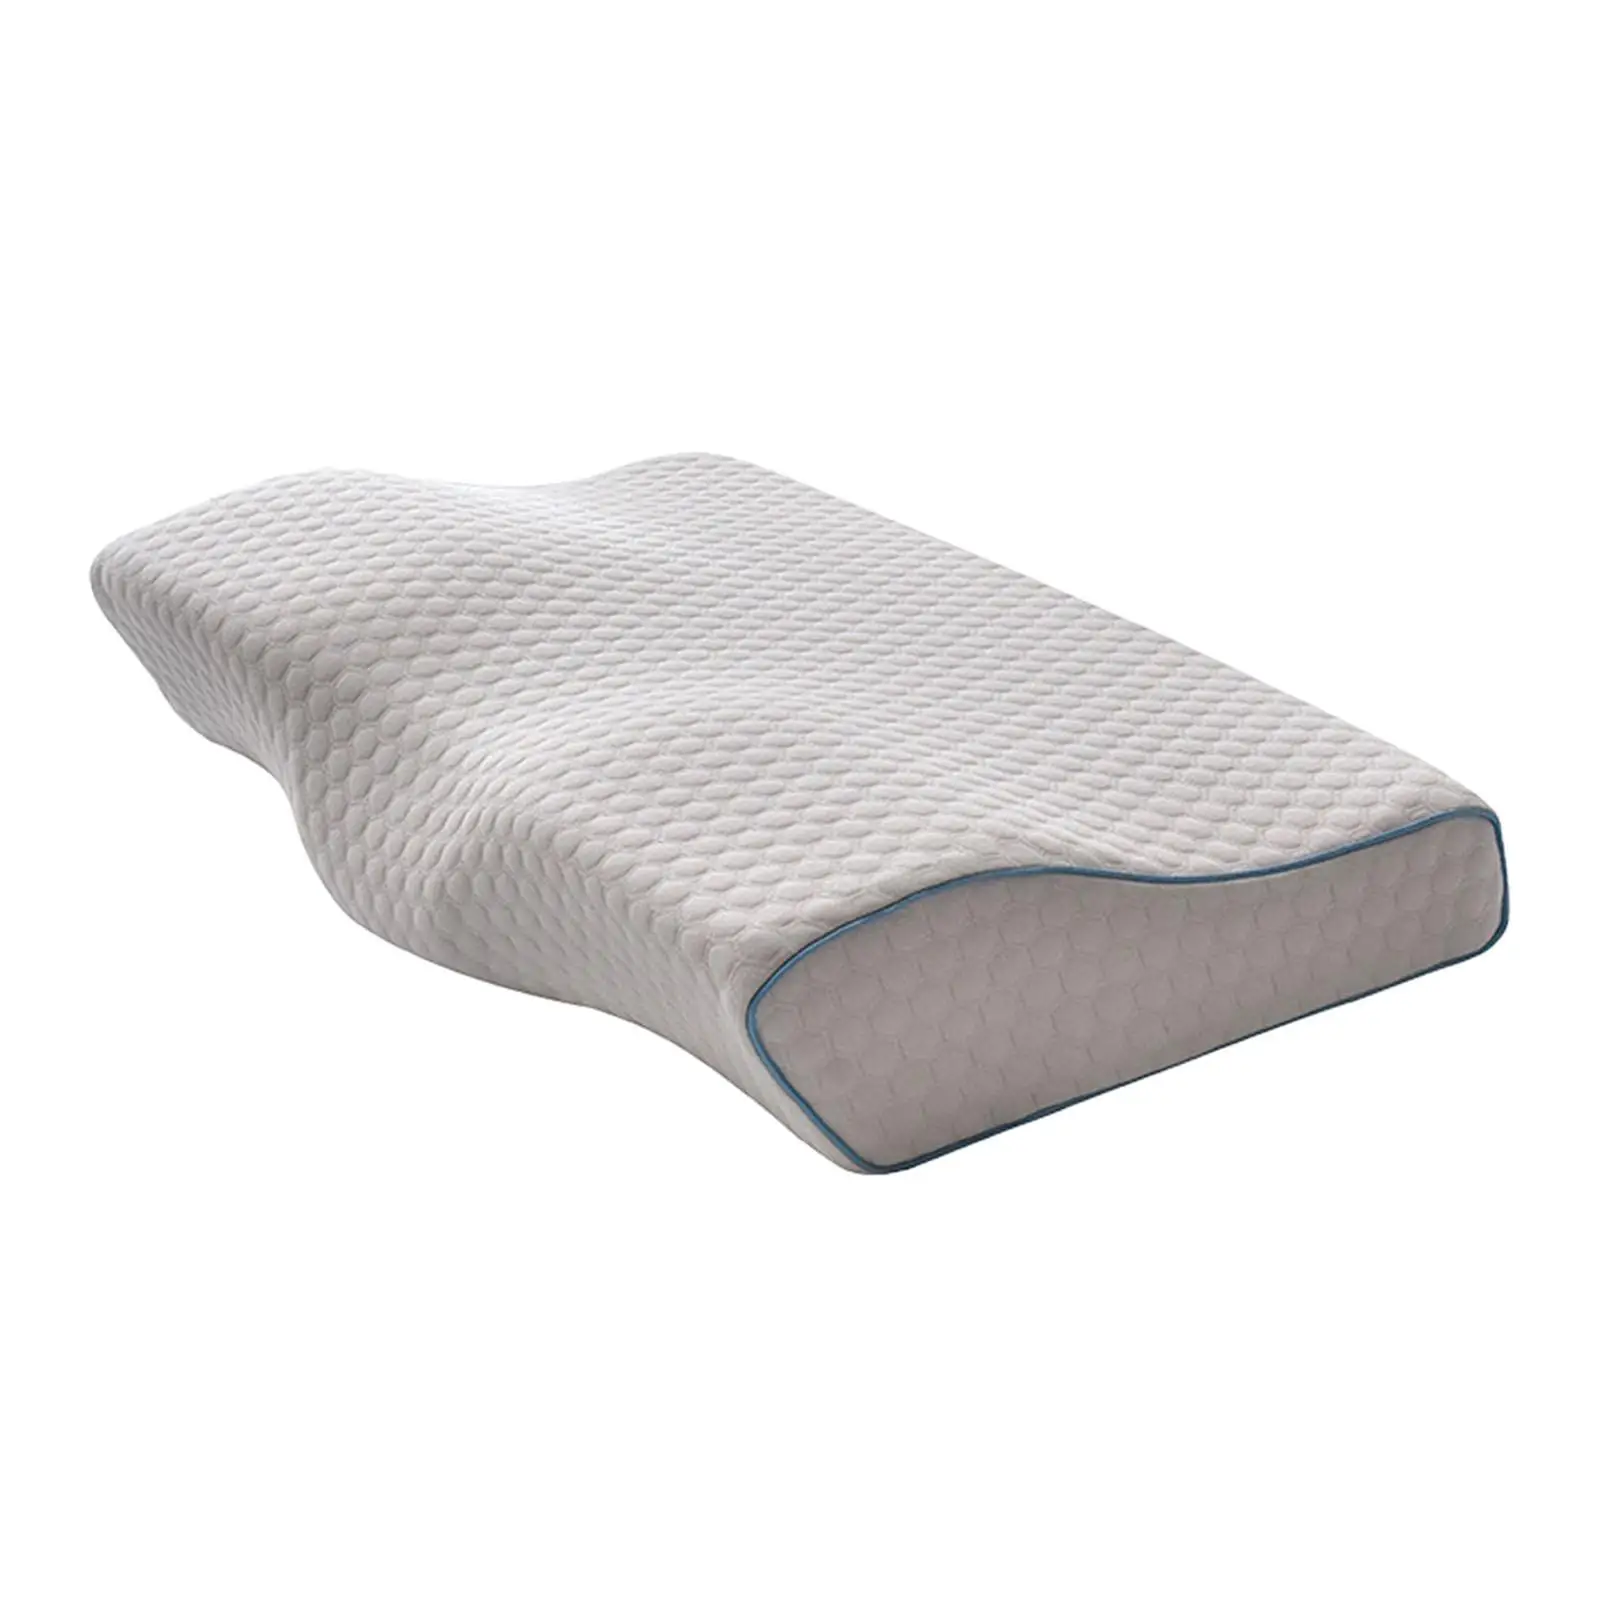 Cervical Memory Foam Pillow Neck Pillows for Side Sleepers Adult Bedroom